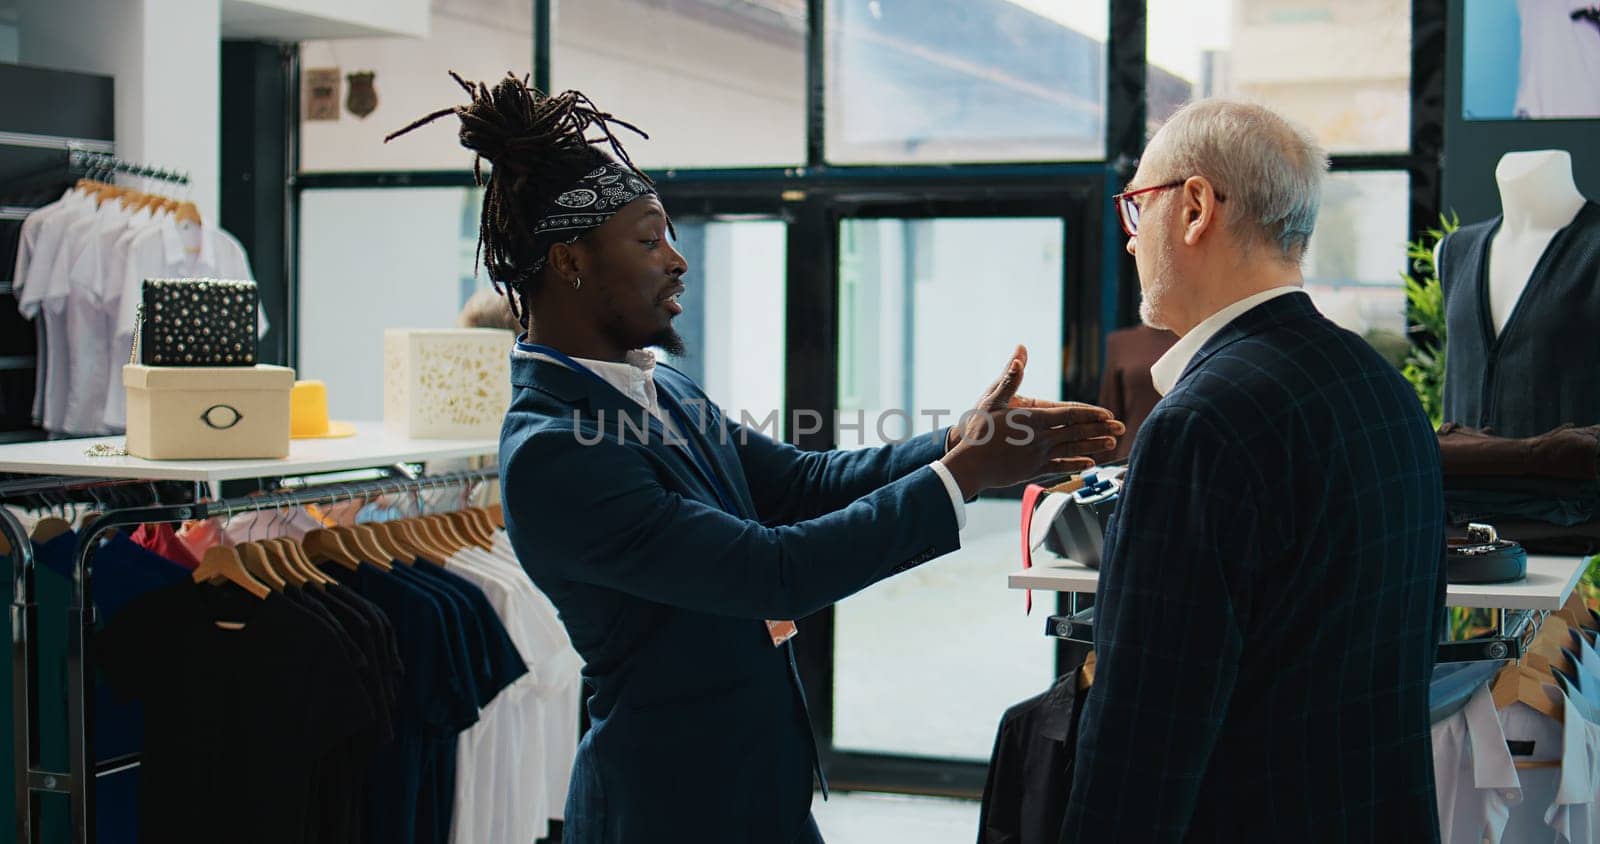 African american worker showing a black shirt and red tie to client, by DCStudio